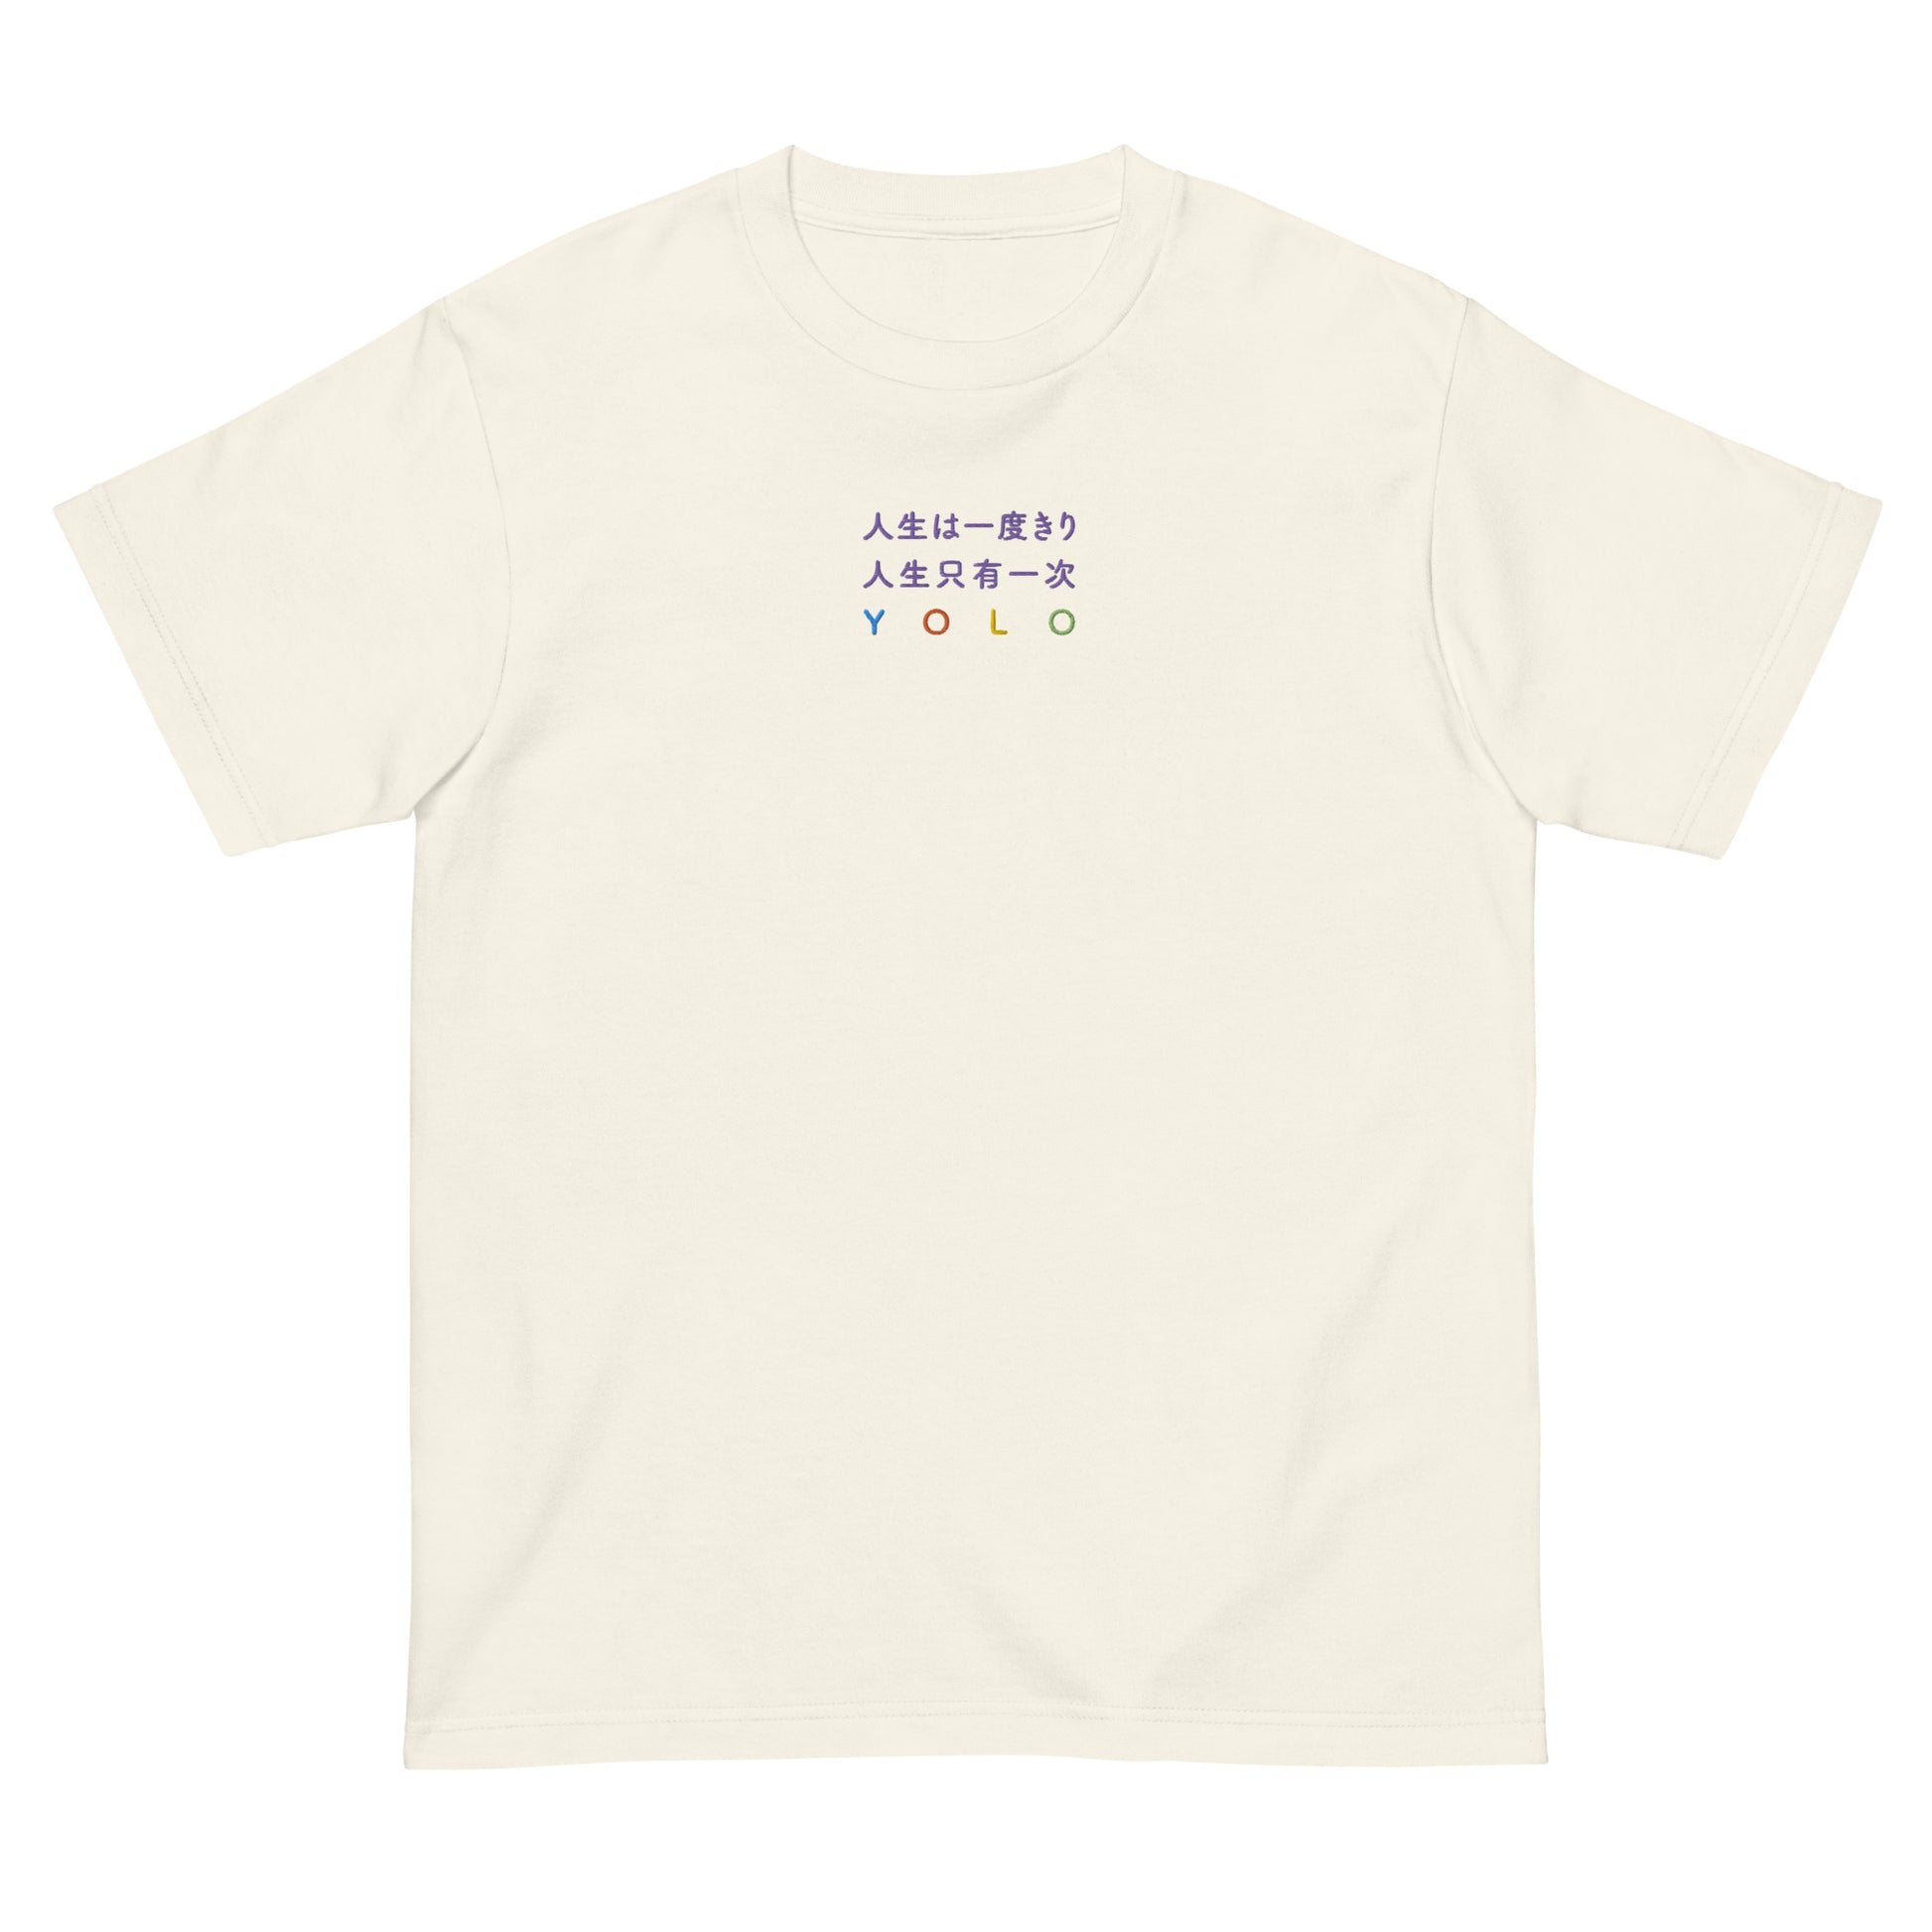 Ivory High Quality Tee - Front Design with an Purple, Light Blue, Orange, Yellow, Light Green Embroidery "YOLO" in Japanese,Chinese and English